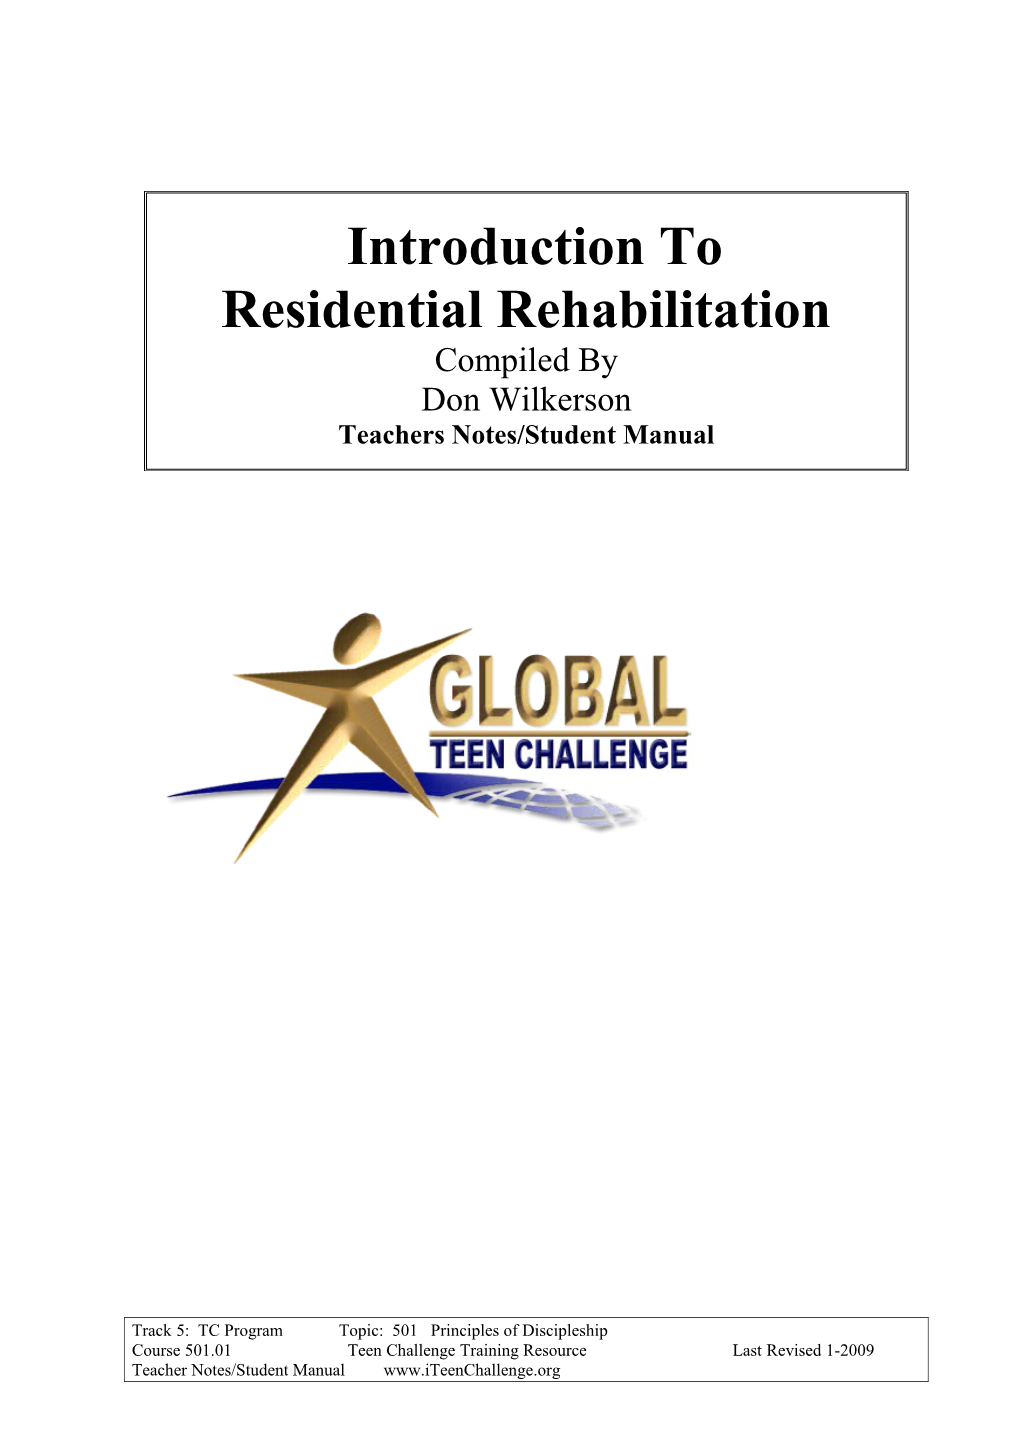 1 Introduction to Residential Rehabilitation